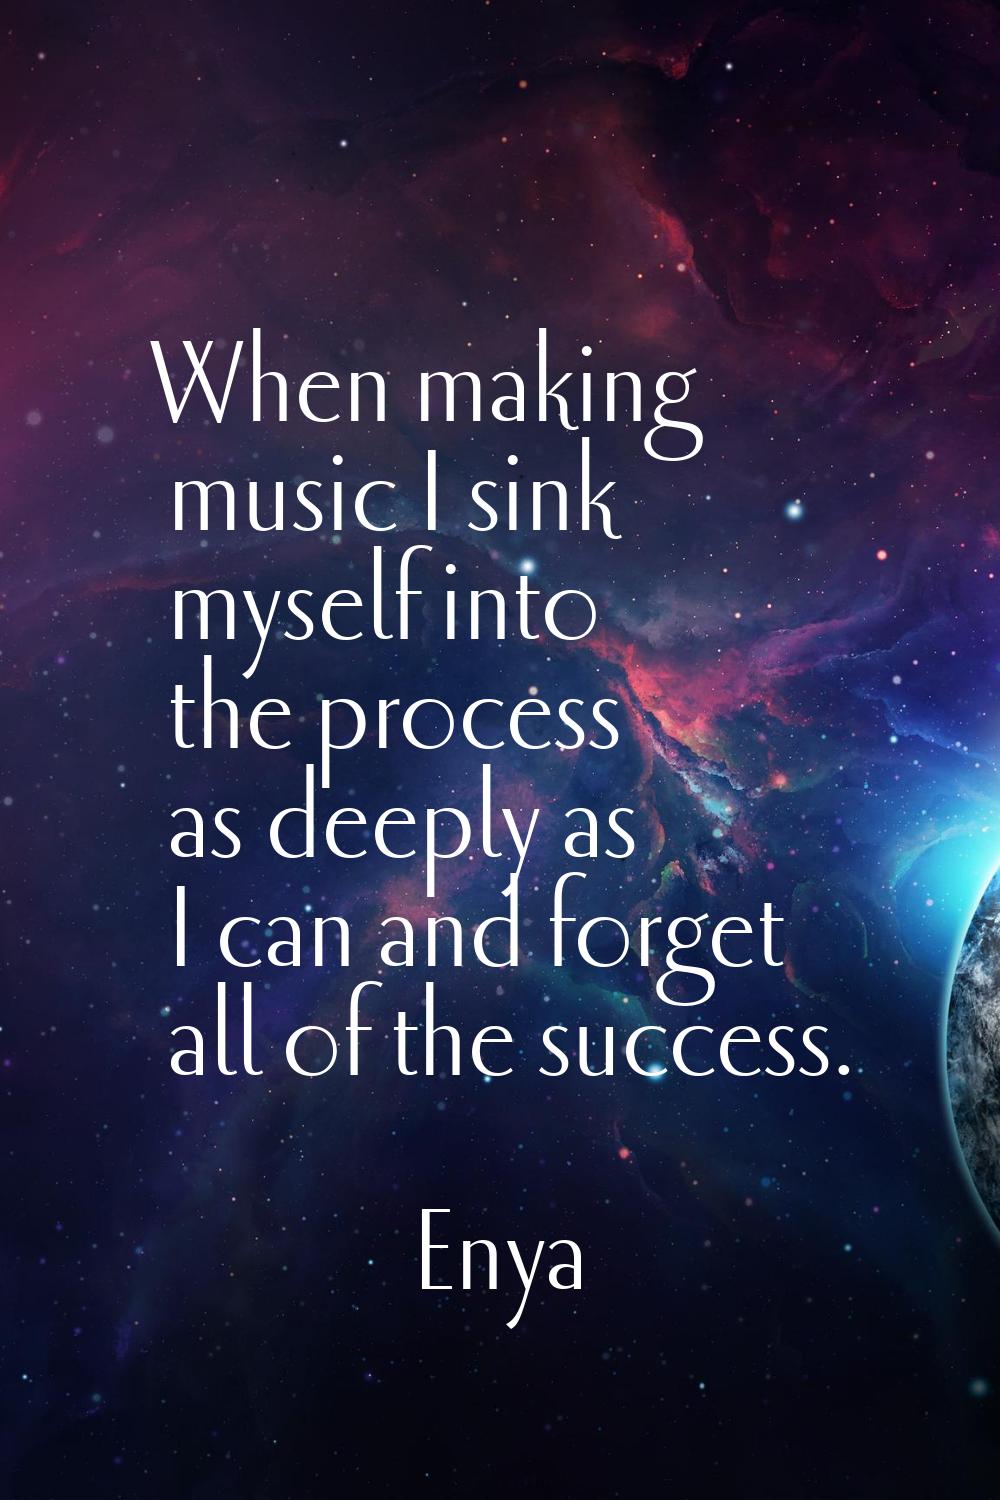 When making music I sink myself into the process as deeply as I can and forget all of the success.